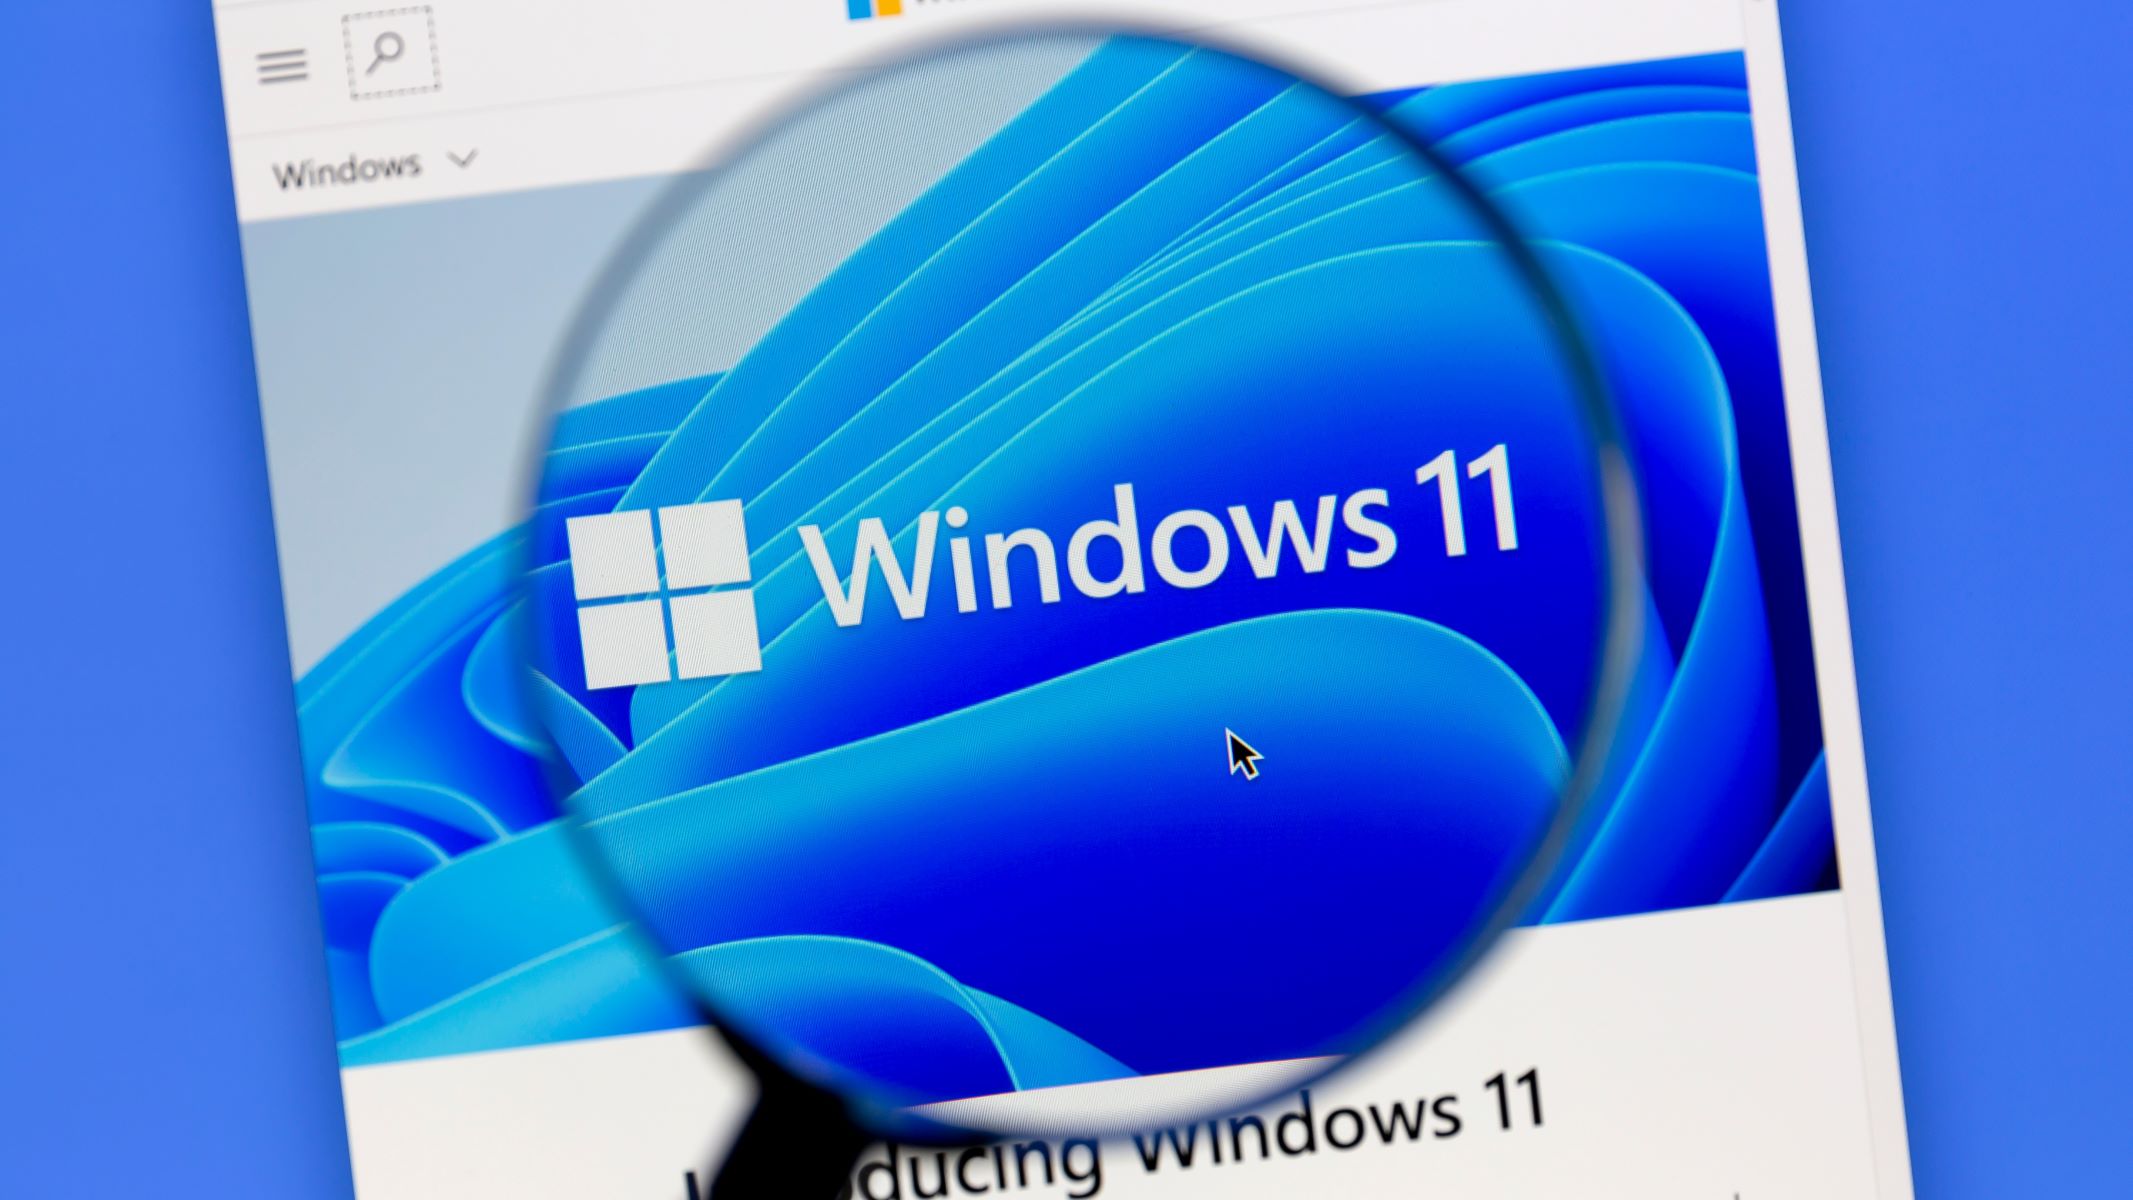 How To Activate Windows 11 For Free